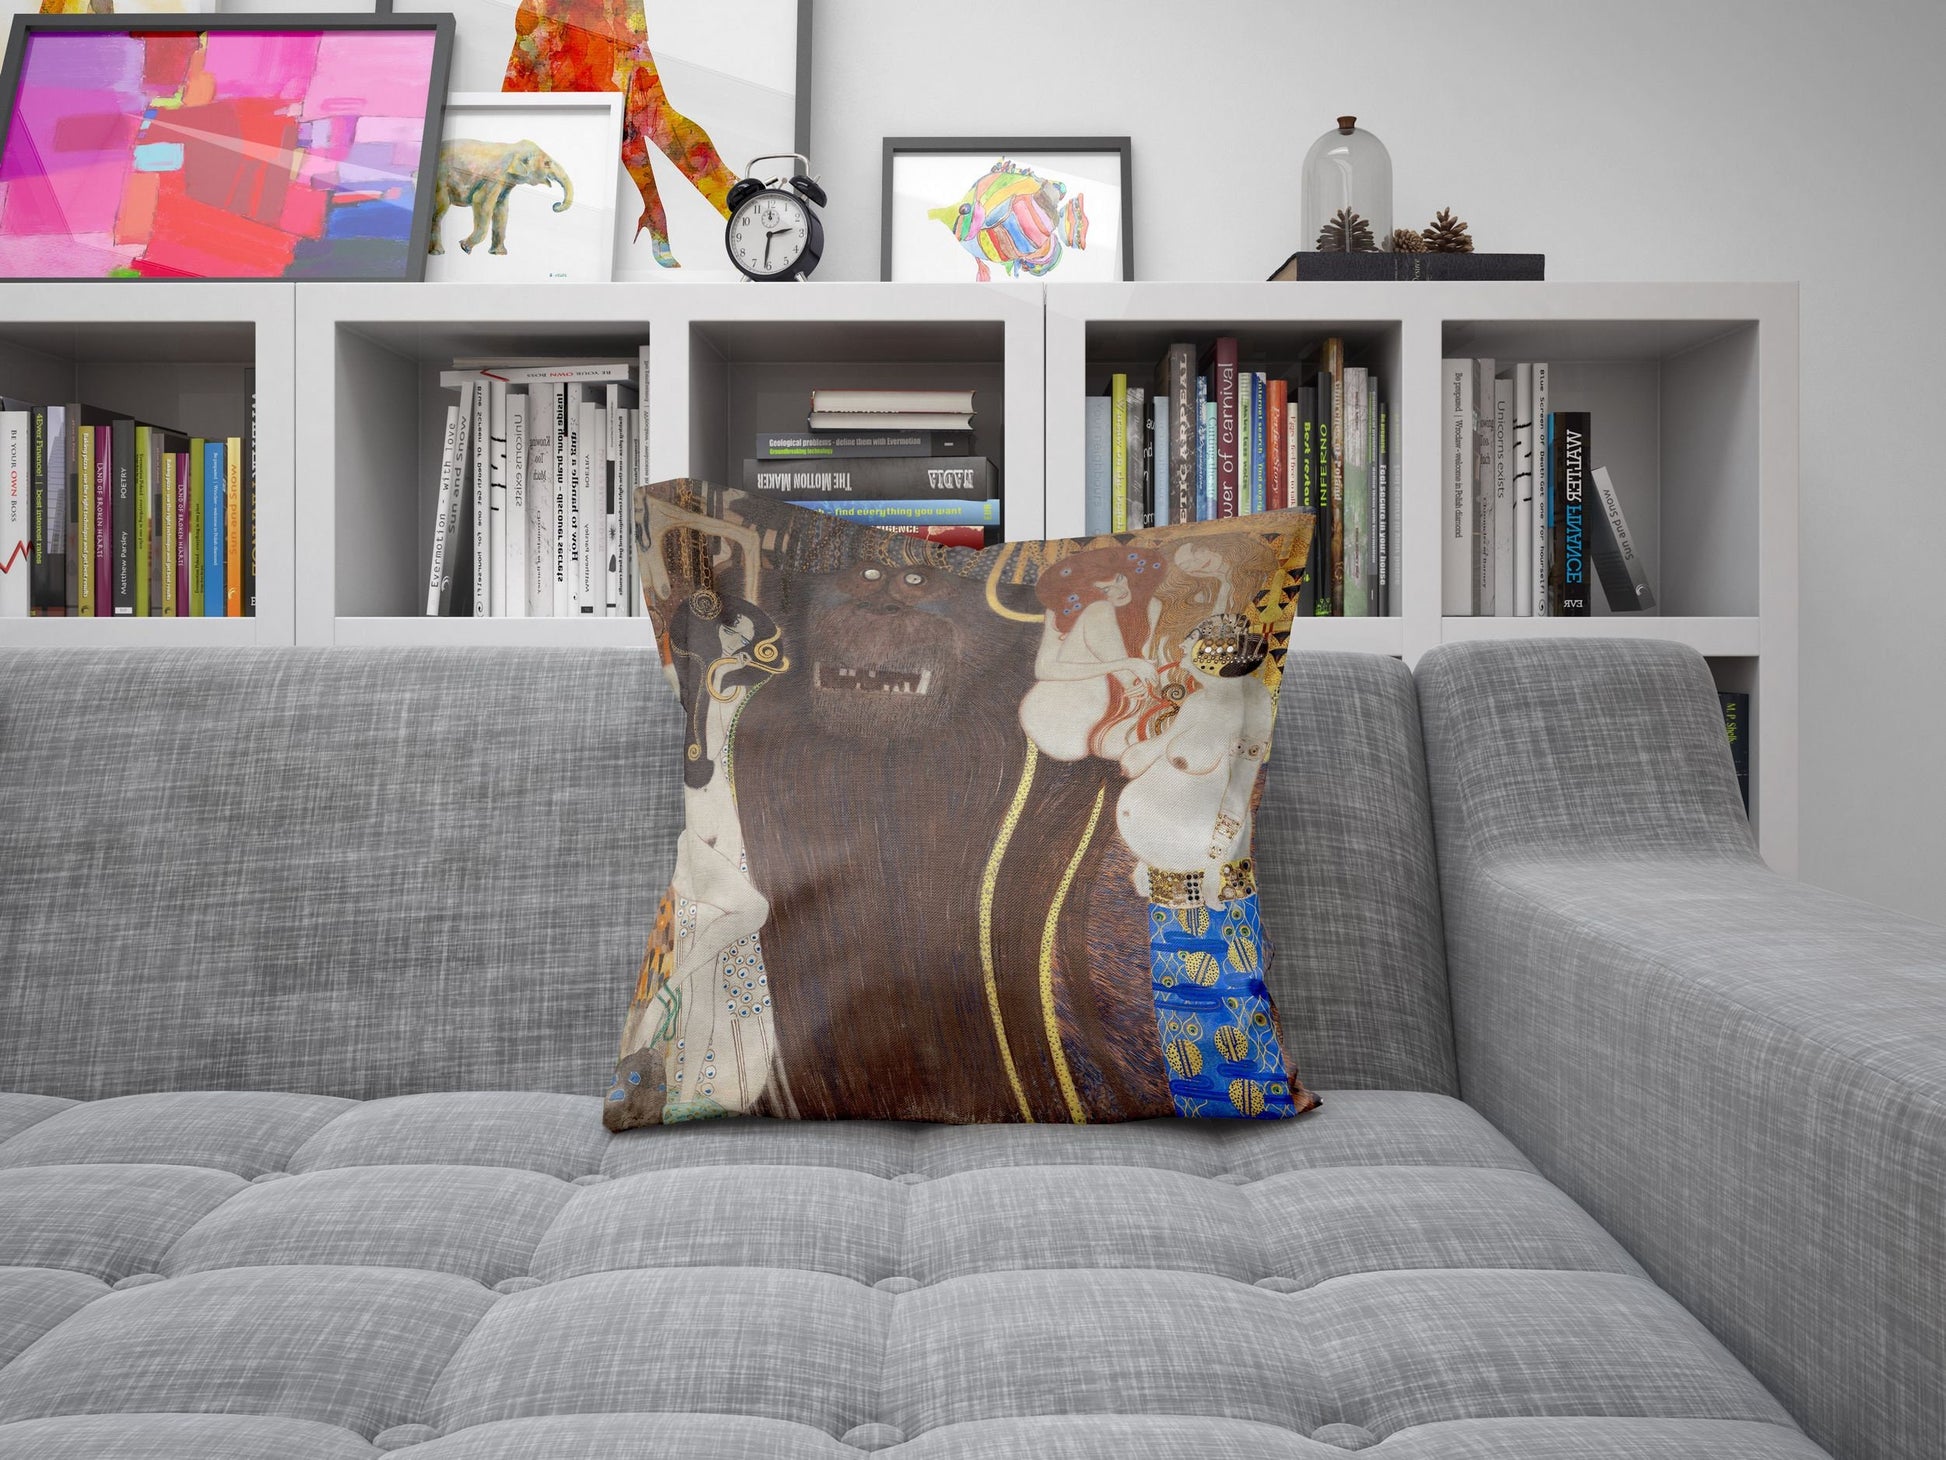 Gustav Klimt Famous Art Beethoven Frieze The Hostile Powers Abstract Throw Pillow Cover, Soft Pillow Cases, Gold, Contemporary Pillow